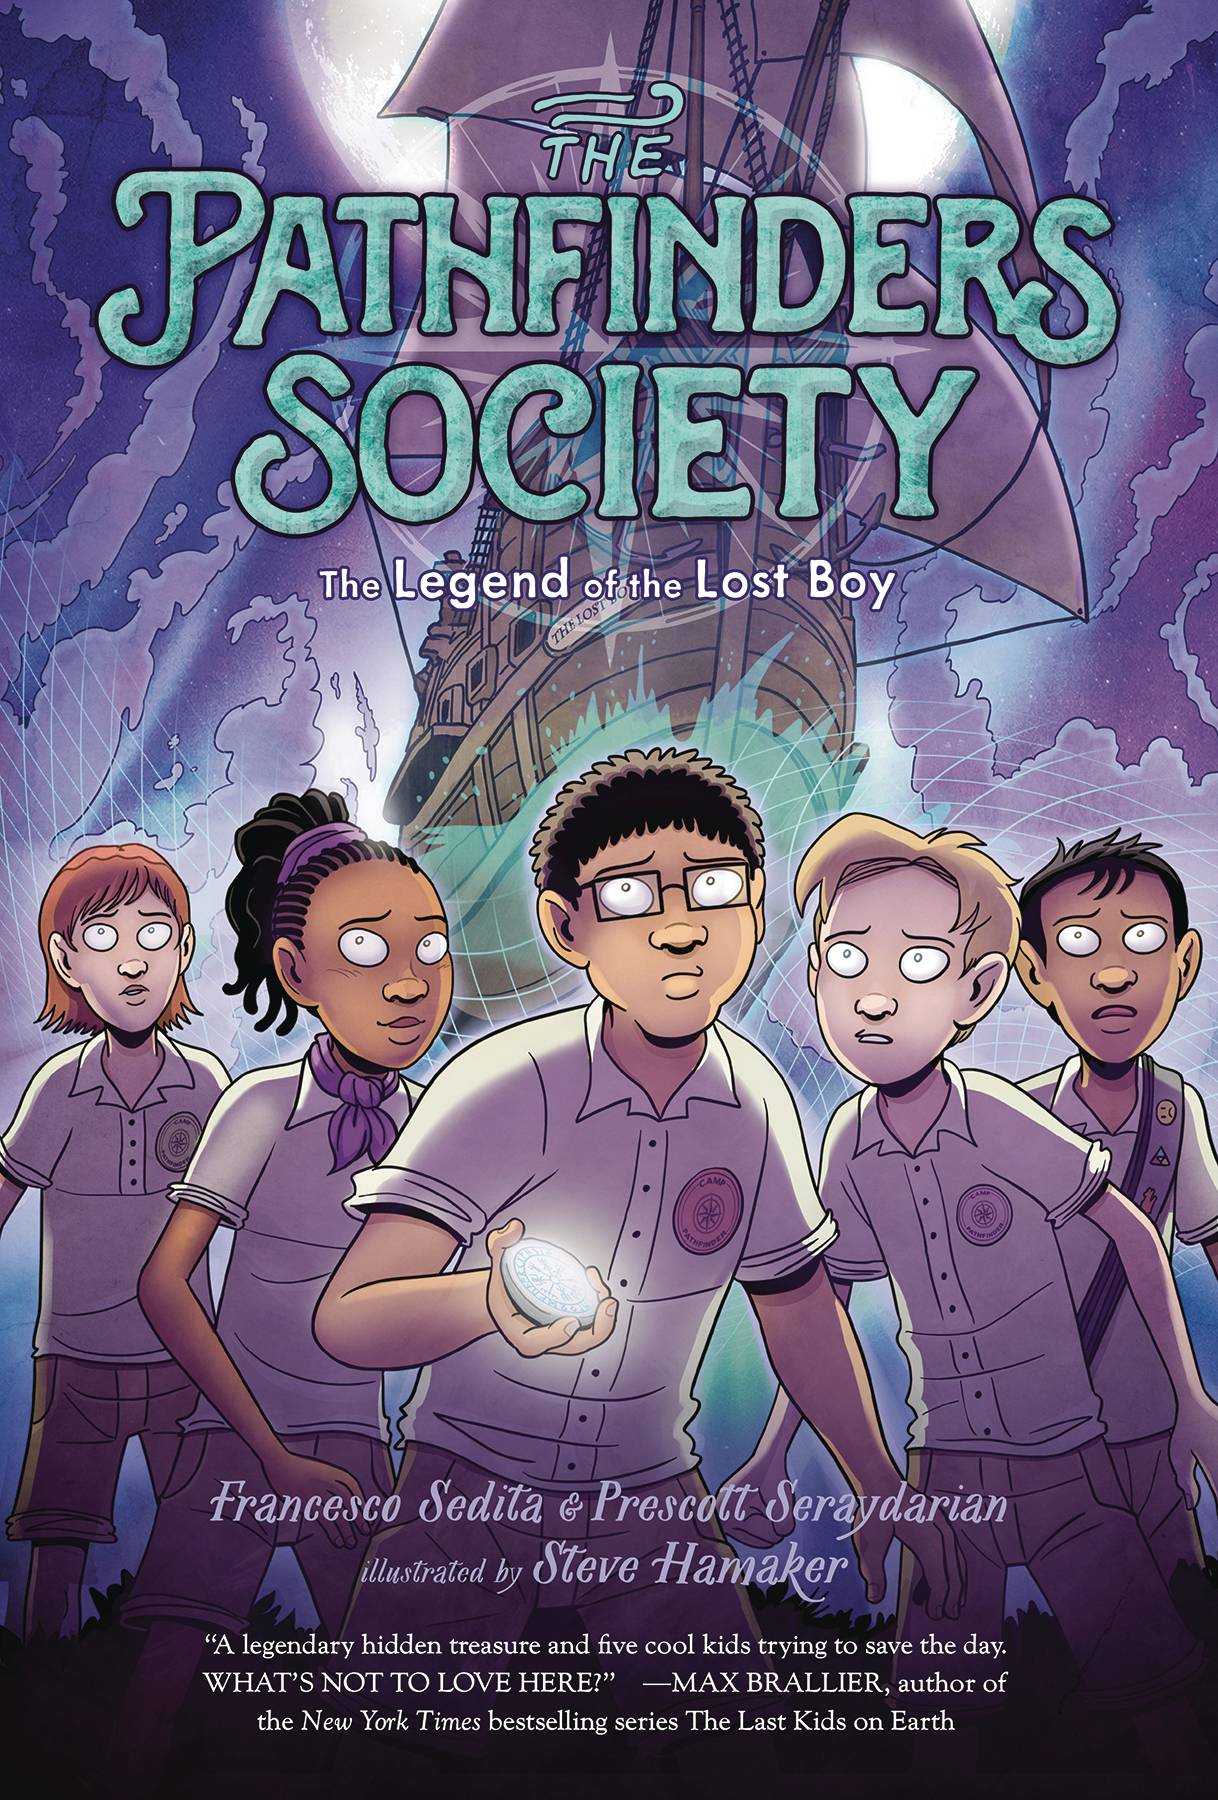 The Pathfinders Society Vol. 03 The Legend of the Lost Boy